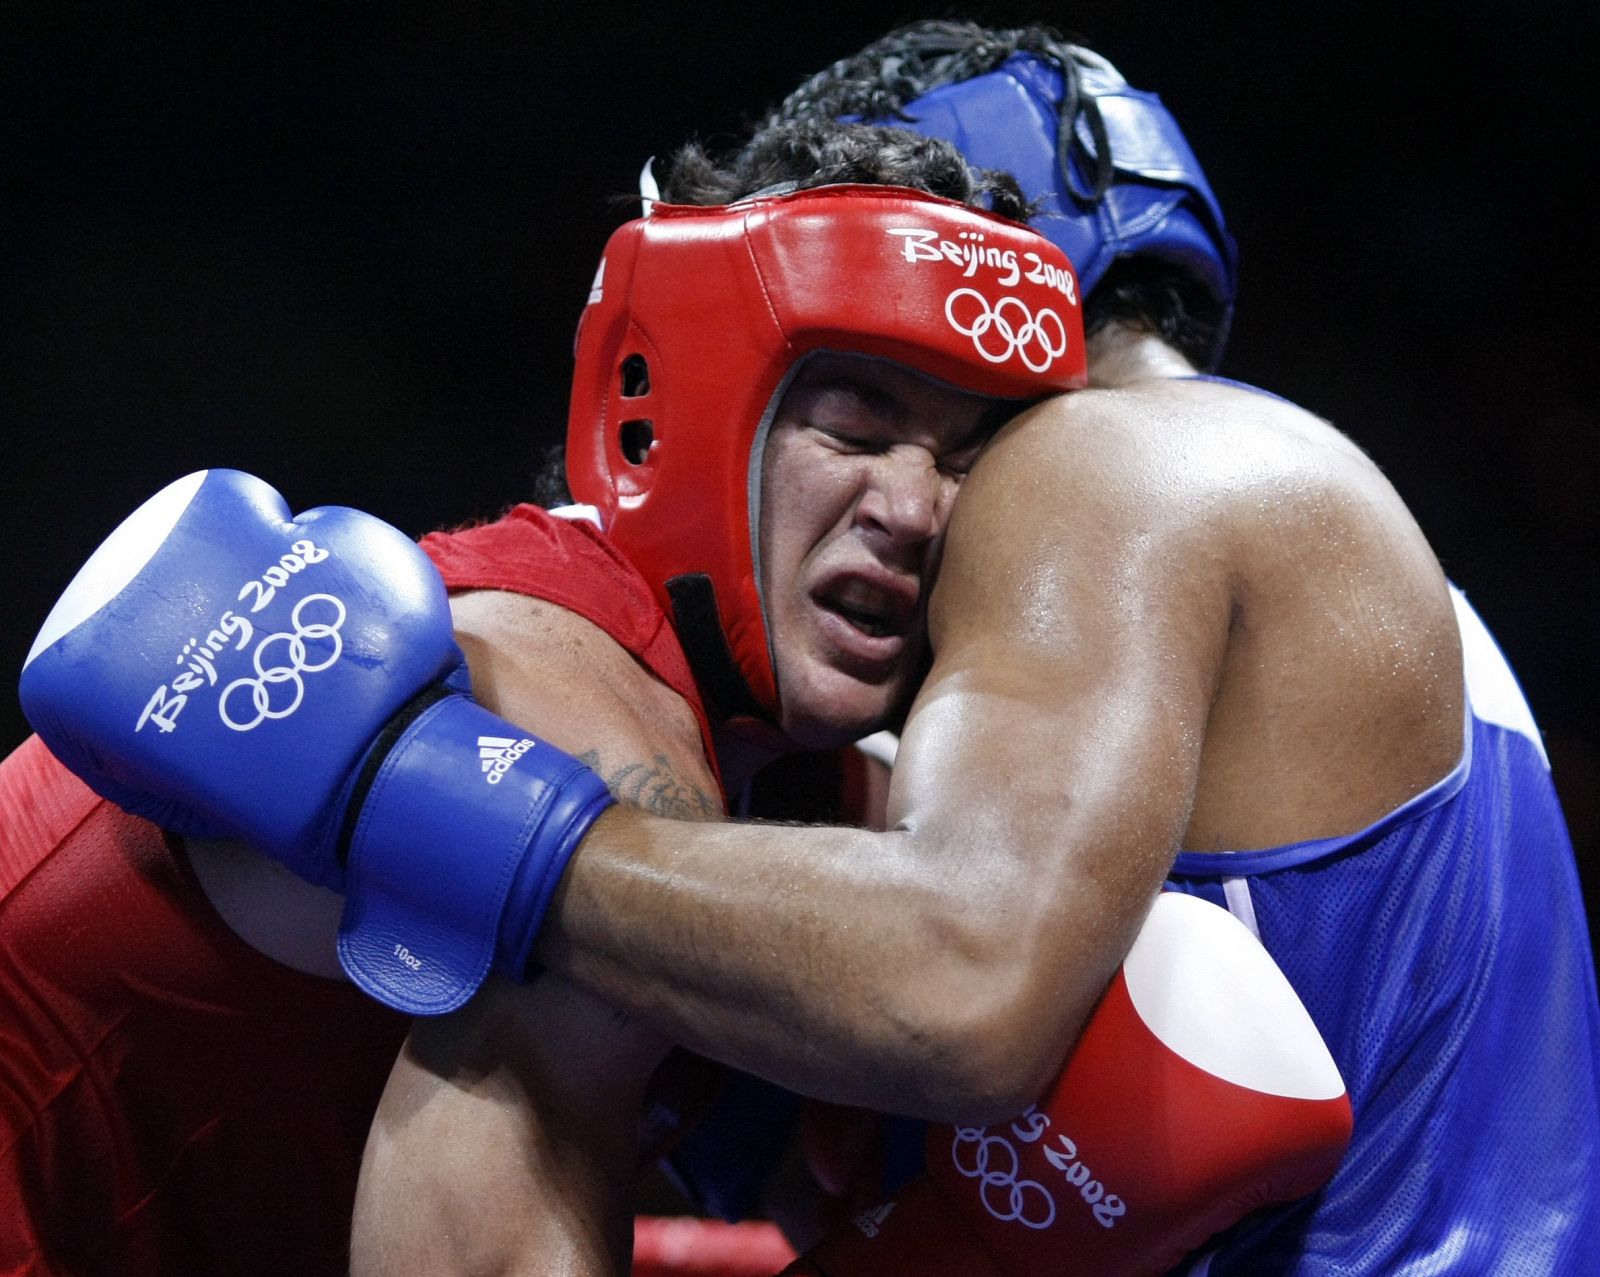 Pitt of Australia fights Arjaoui of Morocco during their men's heavyweight (91kg) round of 16 boxing match at the Beijing 2008 Olympic Games